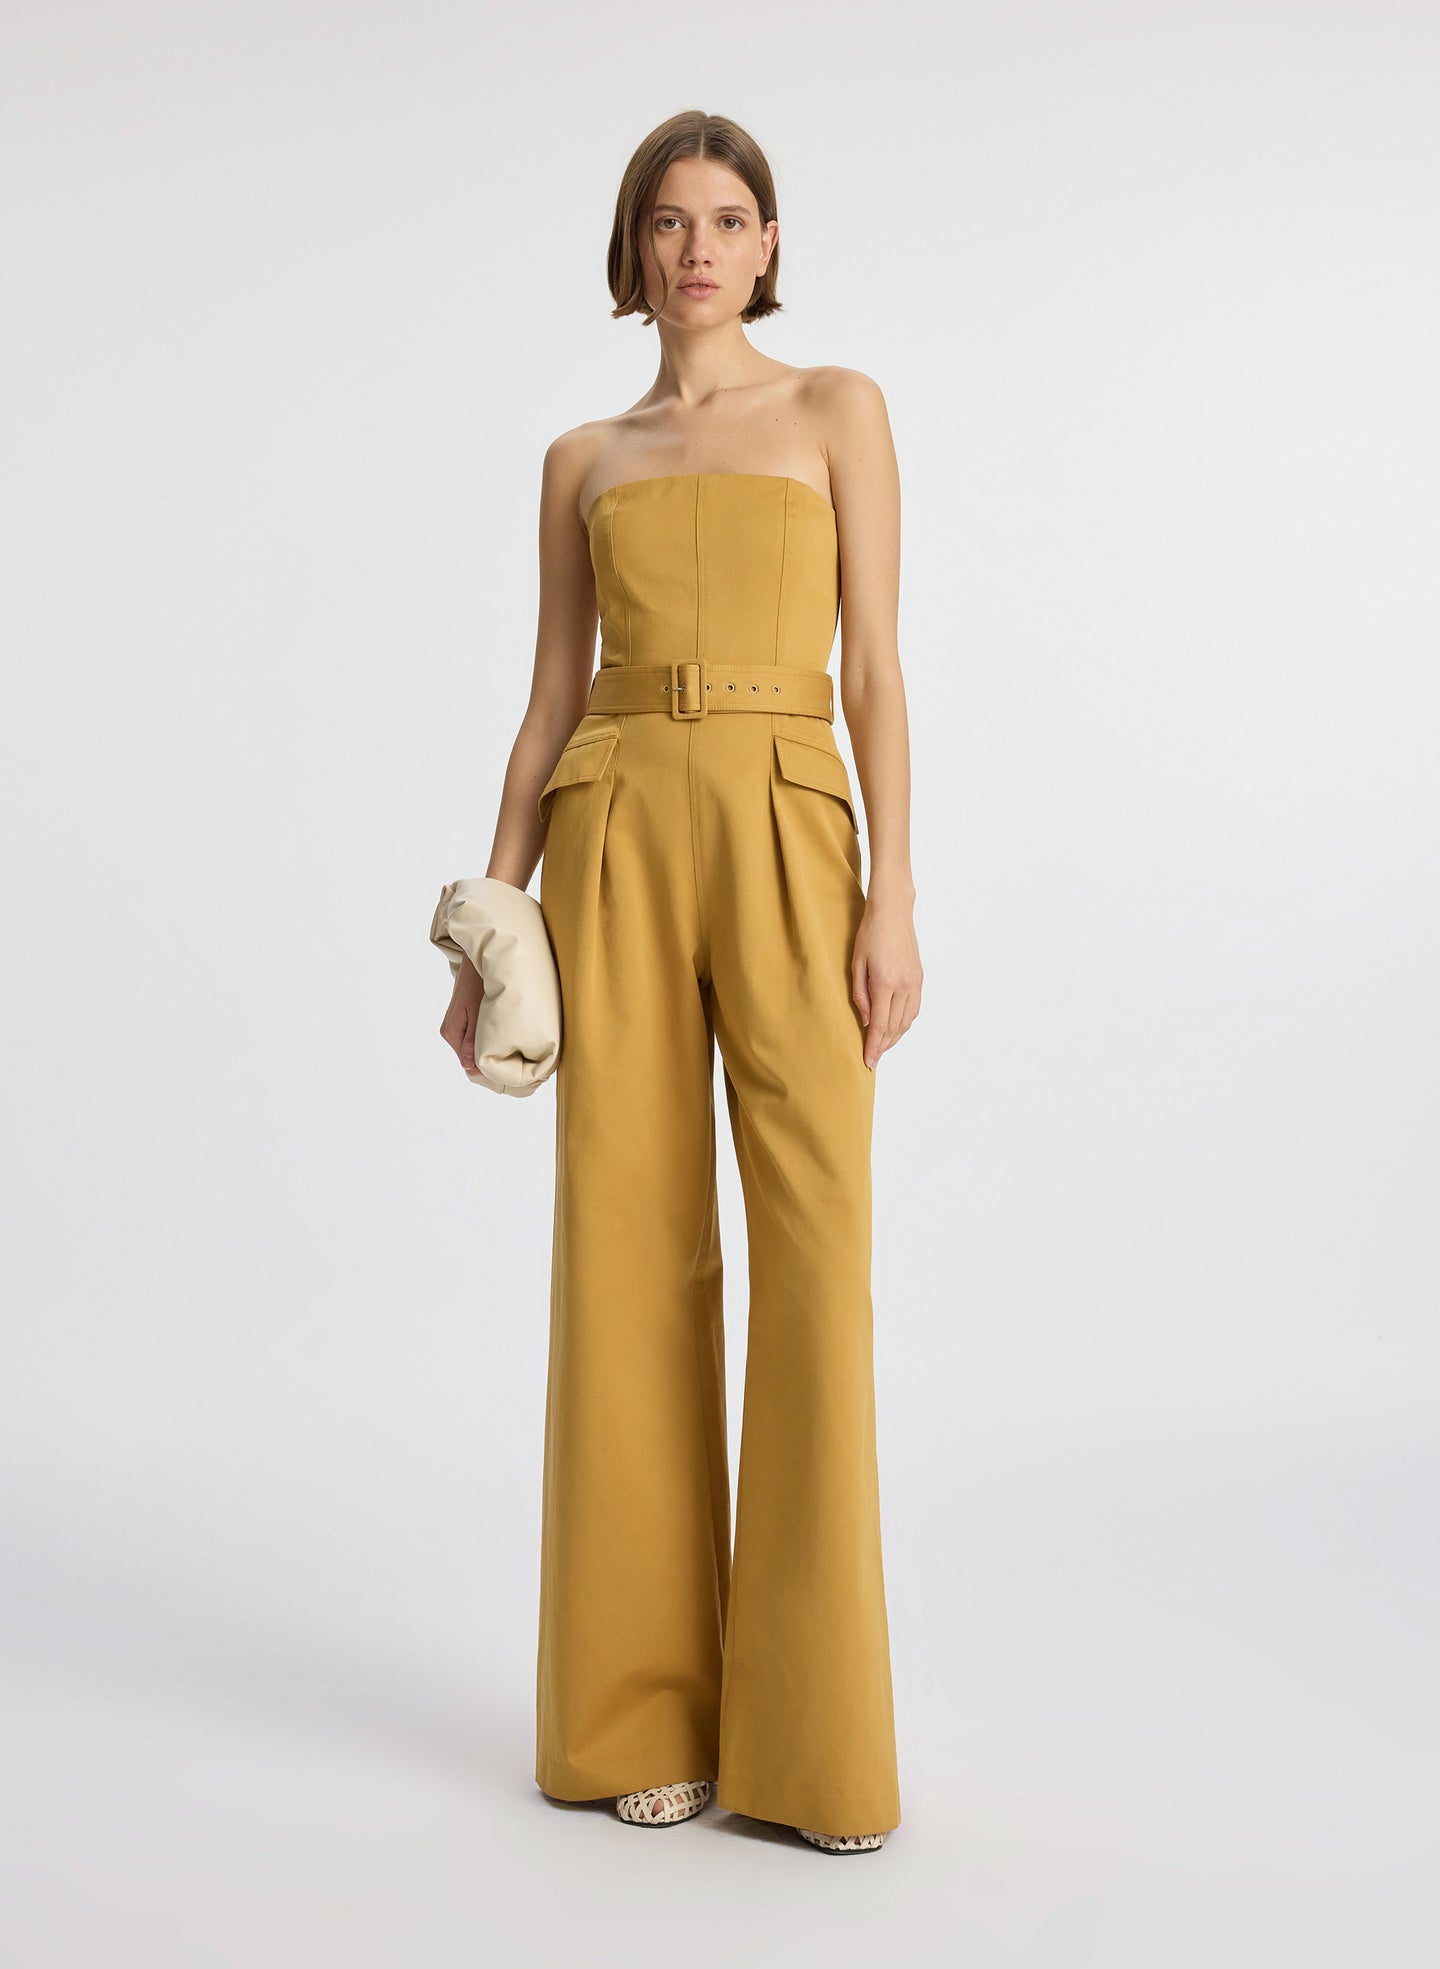 front view of woman wearing tan jumpsuit